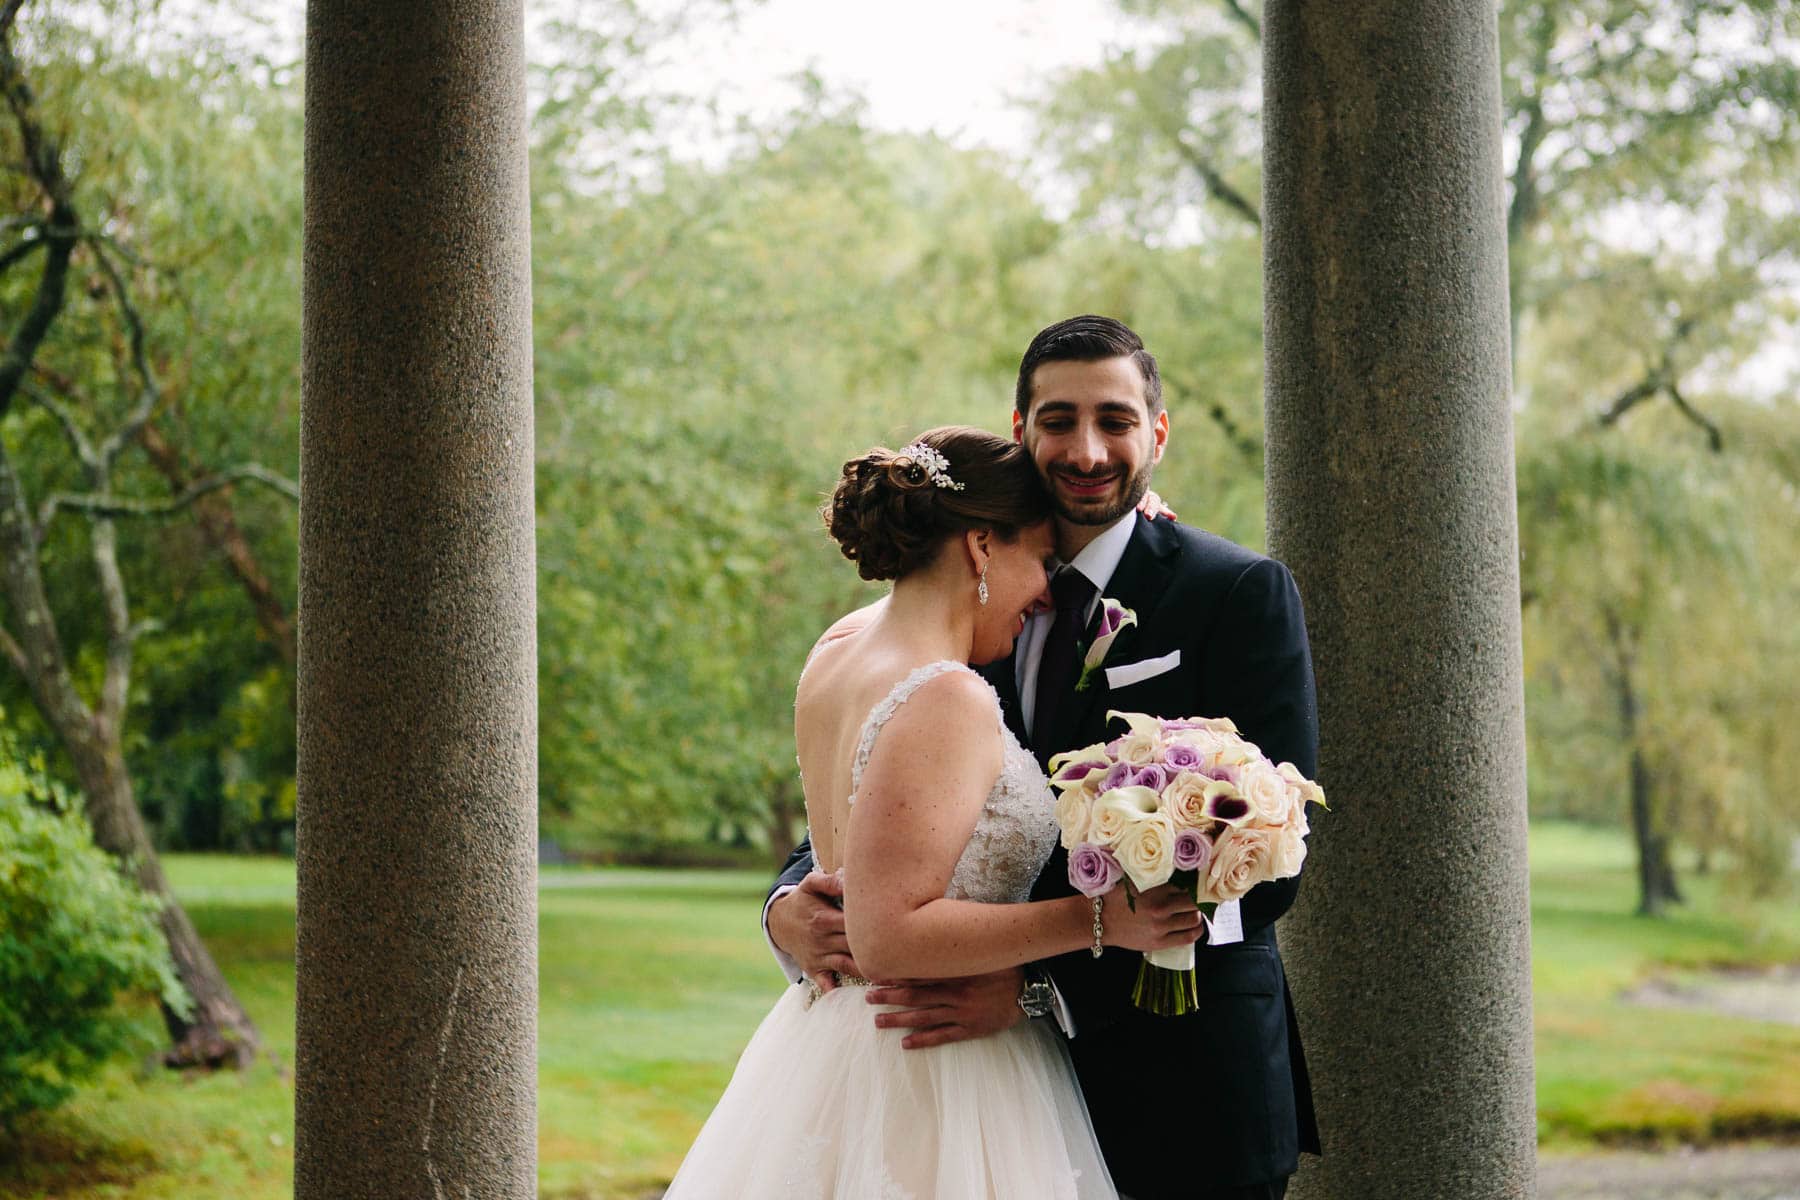 Lauren and George's first look at Larz Anderson Park, Brookline | Kelly Benvenuto Photography | Boston wedding photographer